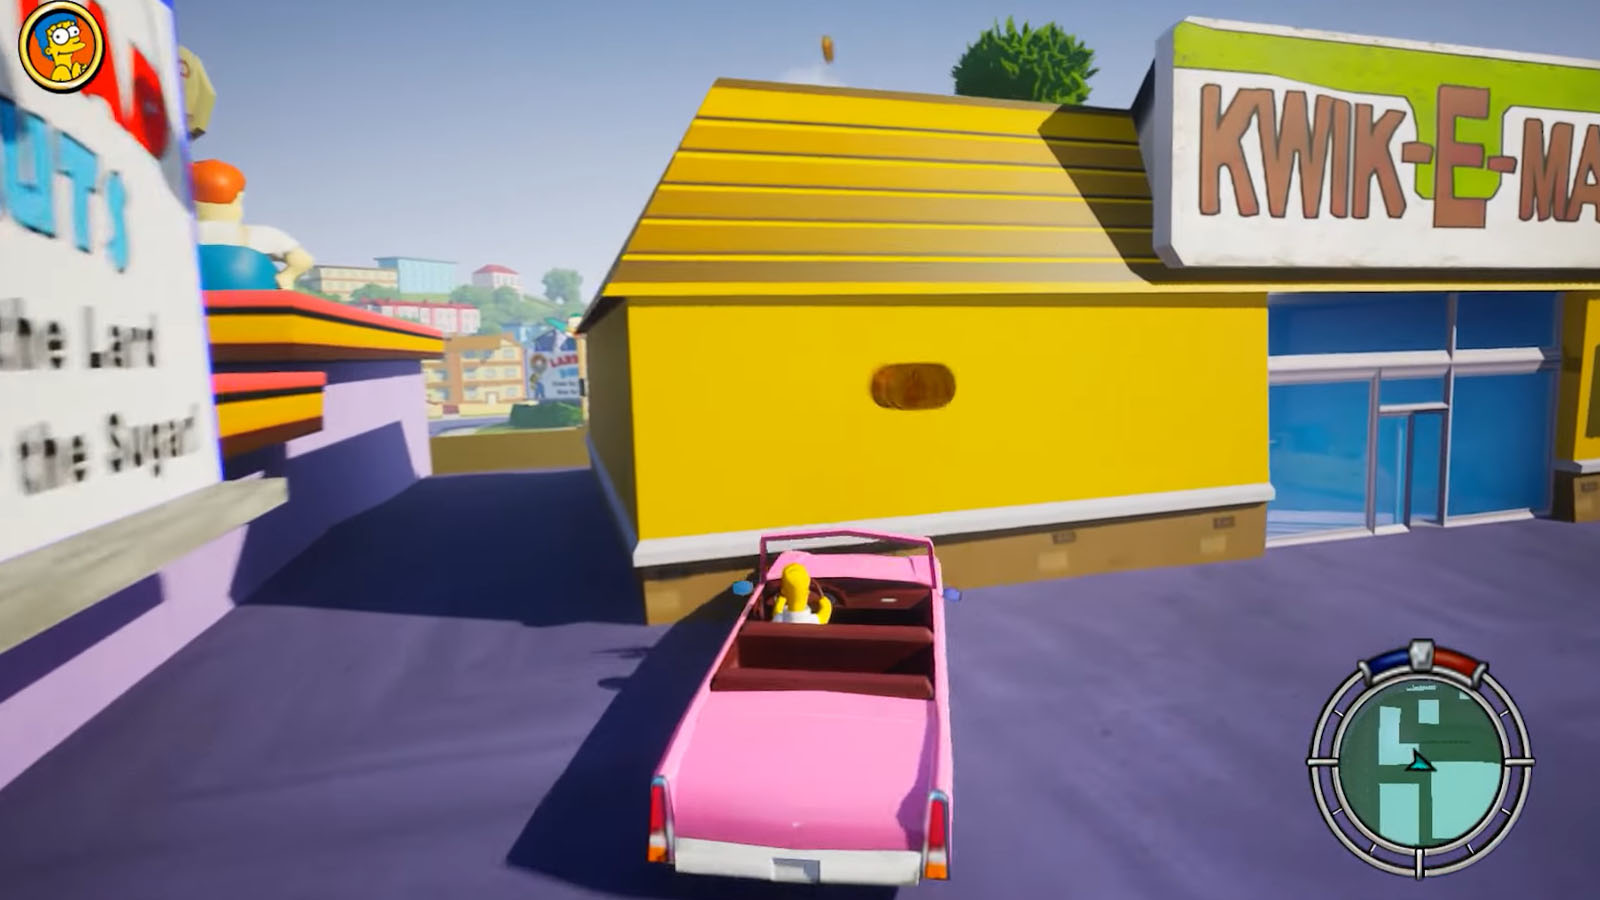 simpsons hit and run remastered